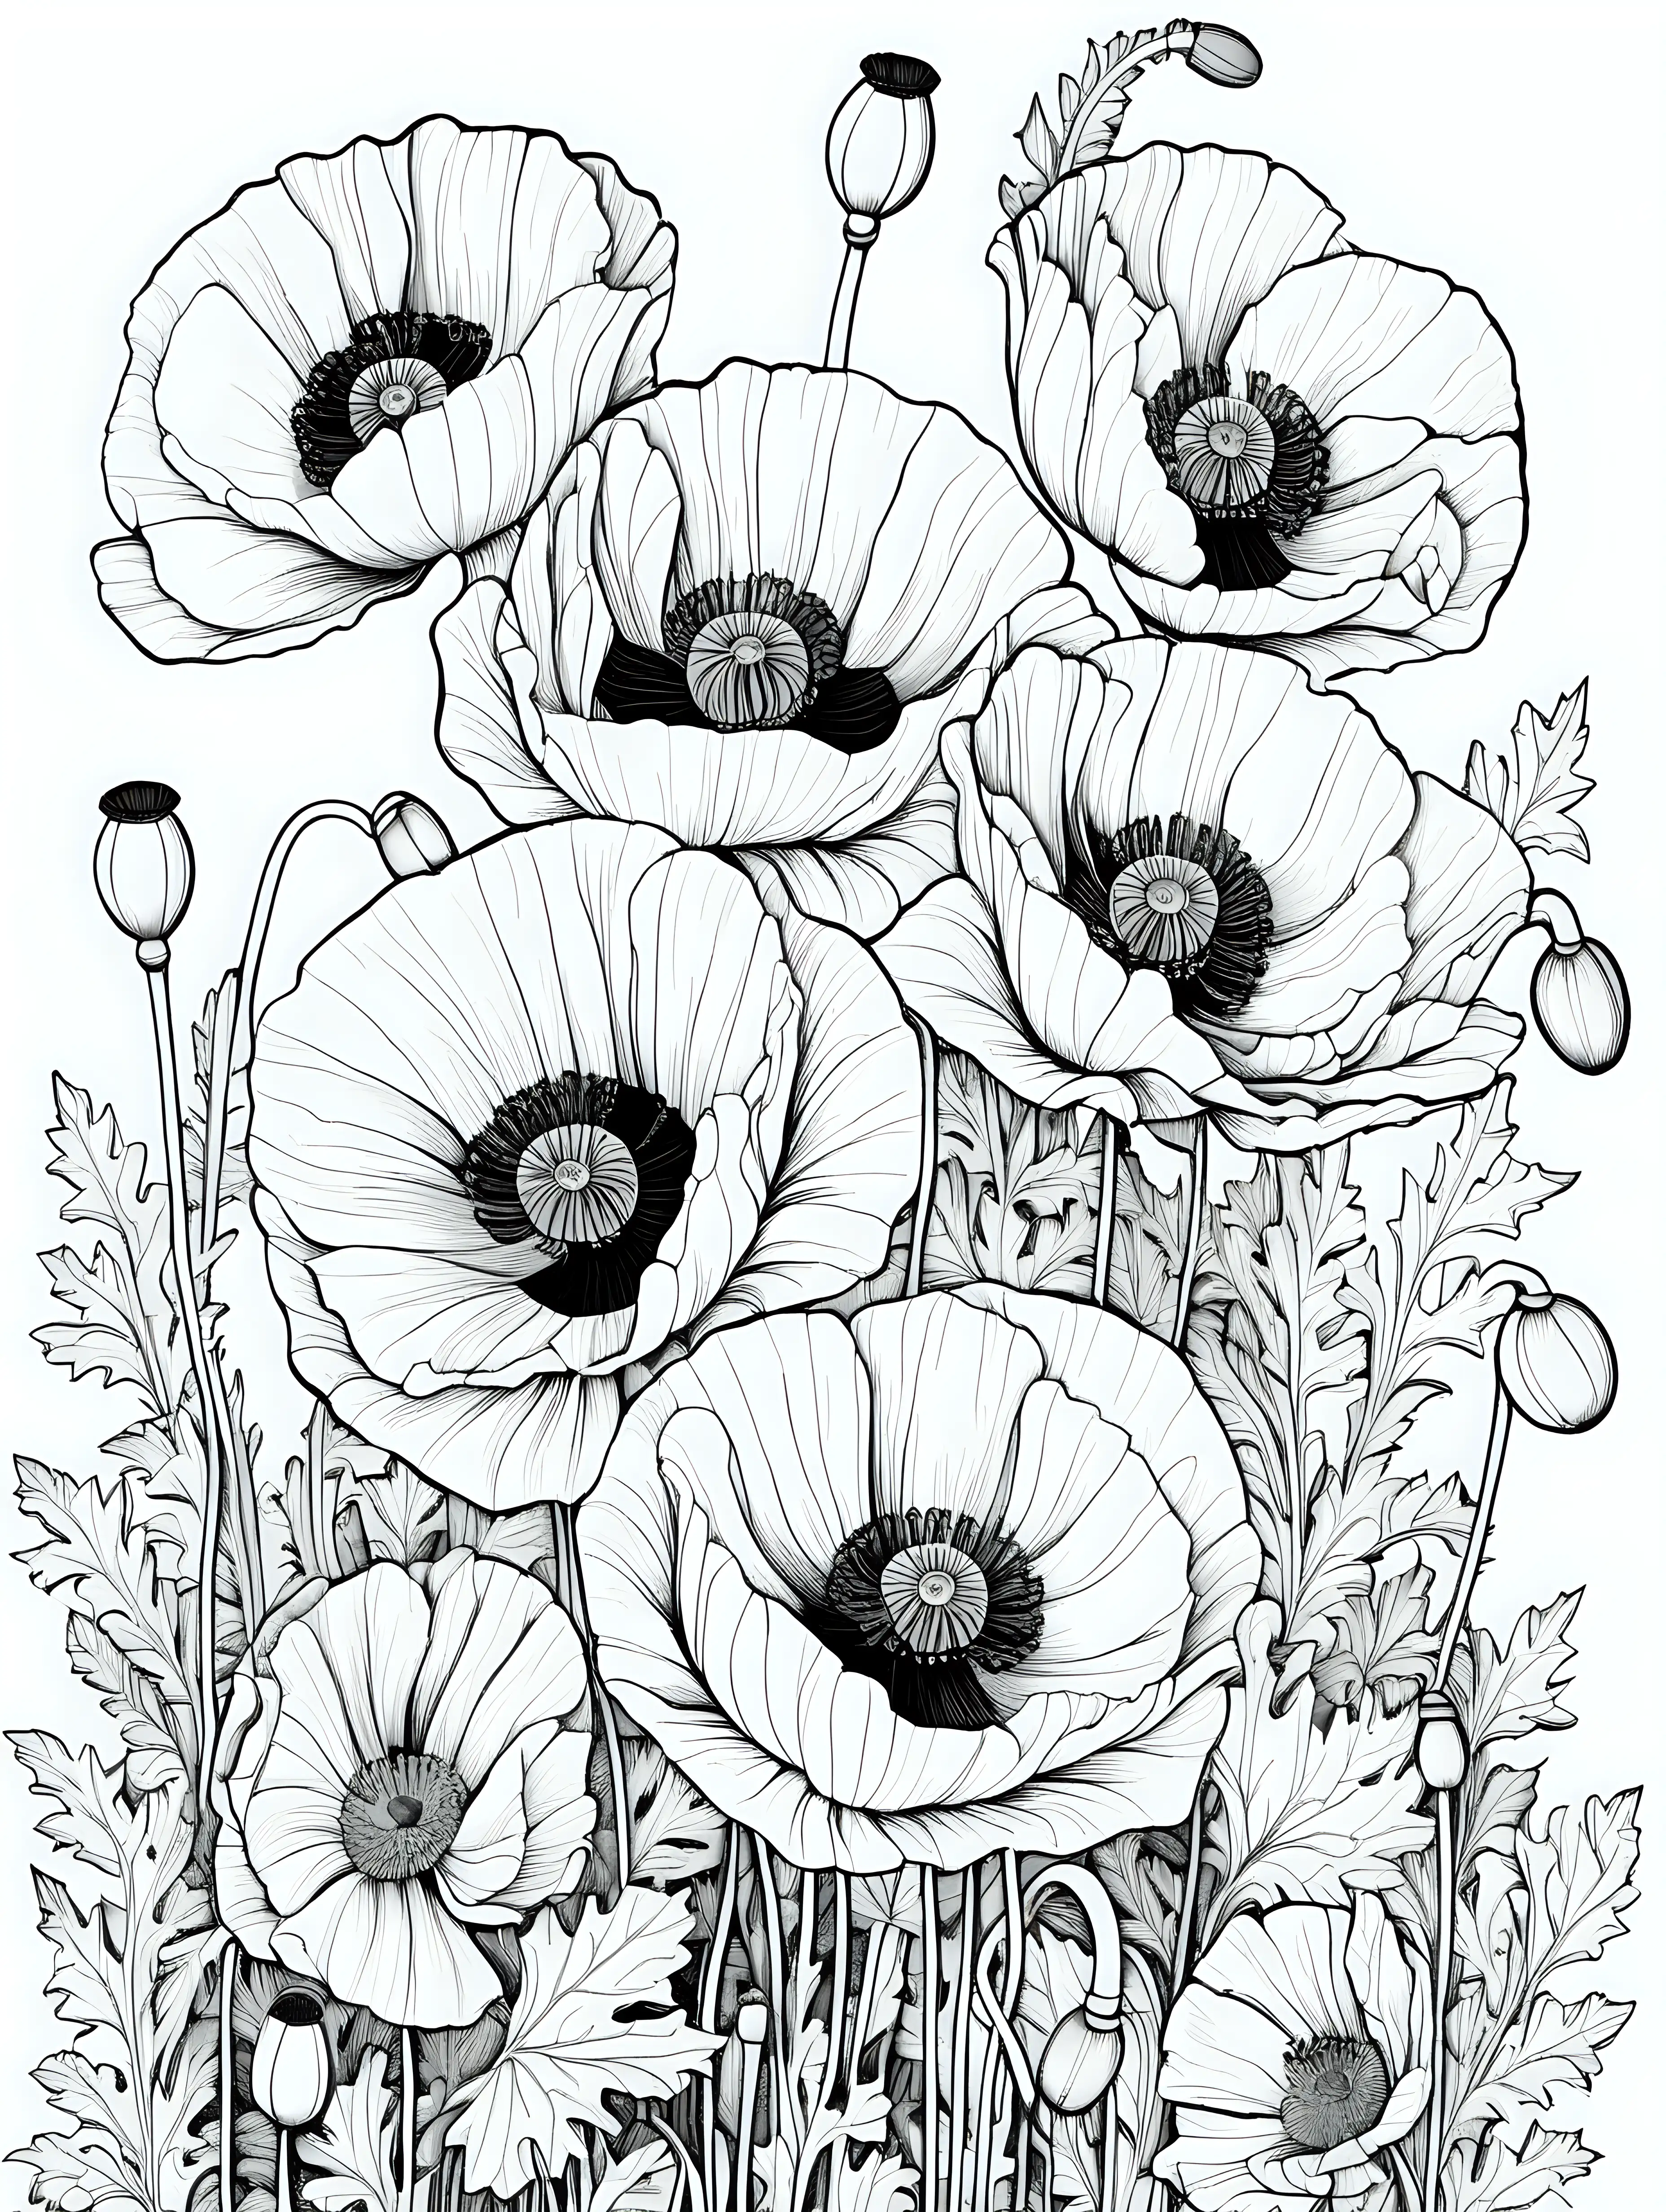 A composition of large poppy flowers filling the entire page black and white coloring page, cartoon style, thin lines, few details, no background, no shadows, no greys